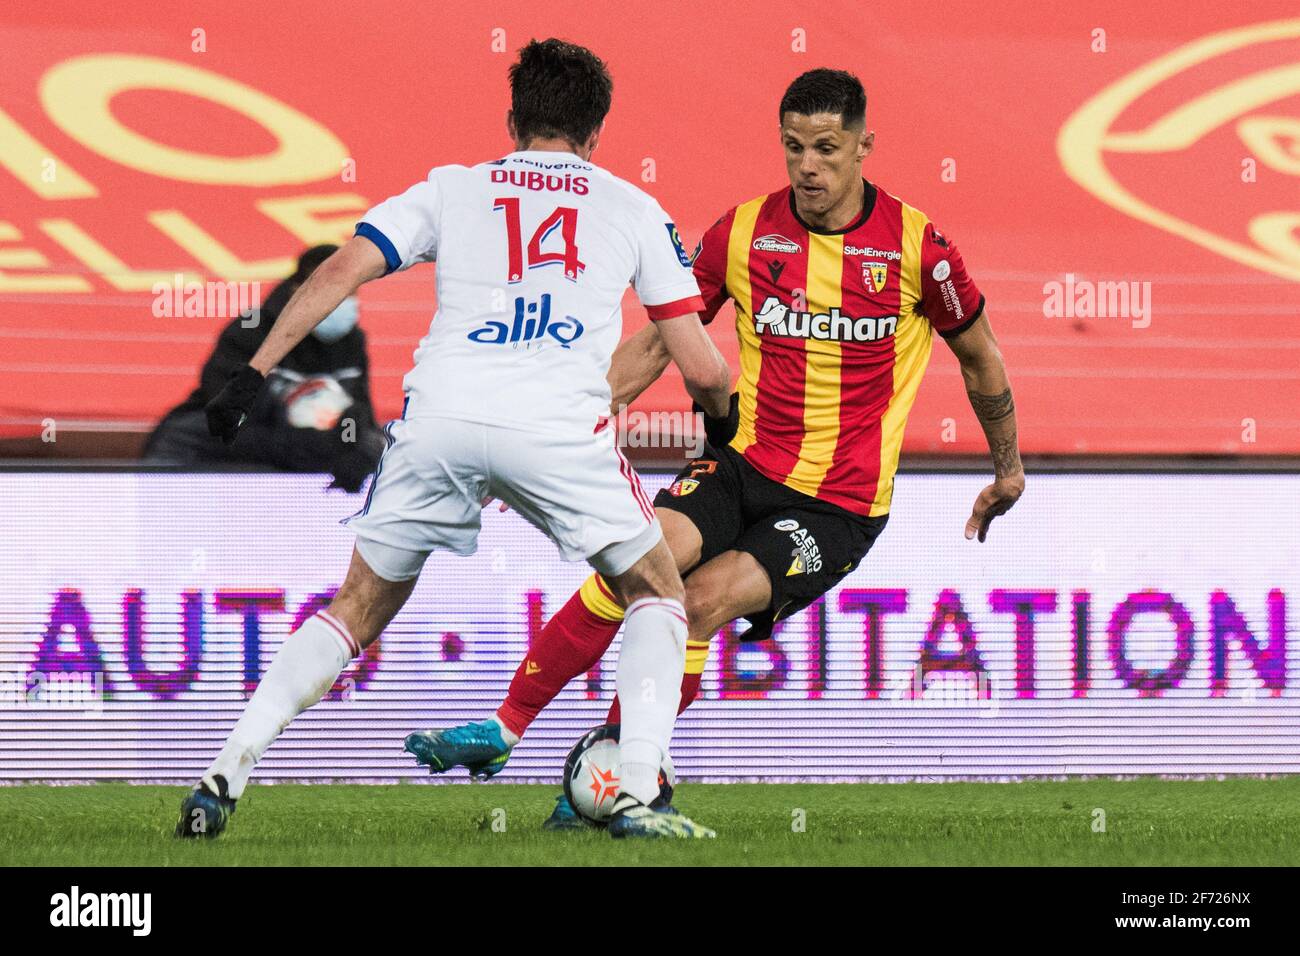 LensâÂ€Â™ French forward Florian Sotoca fights for the ball with LyonâÂ€Â™s  French defender Leo Dubois during the Ligue 1 football match between RC  Lens (RCL) and Olympique Lyonnais (OL) at Stade Bollaert